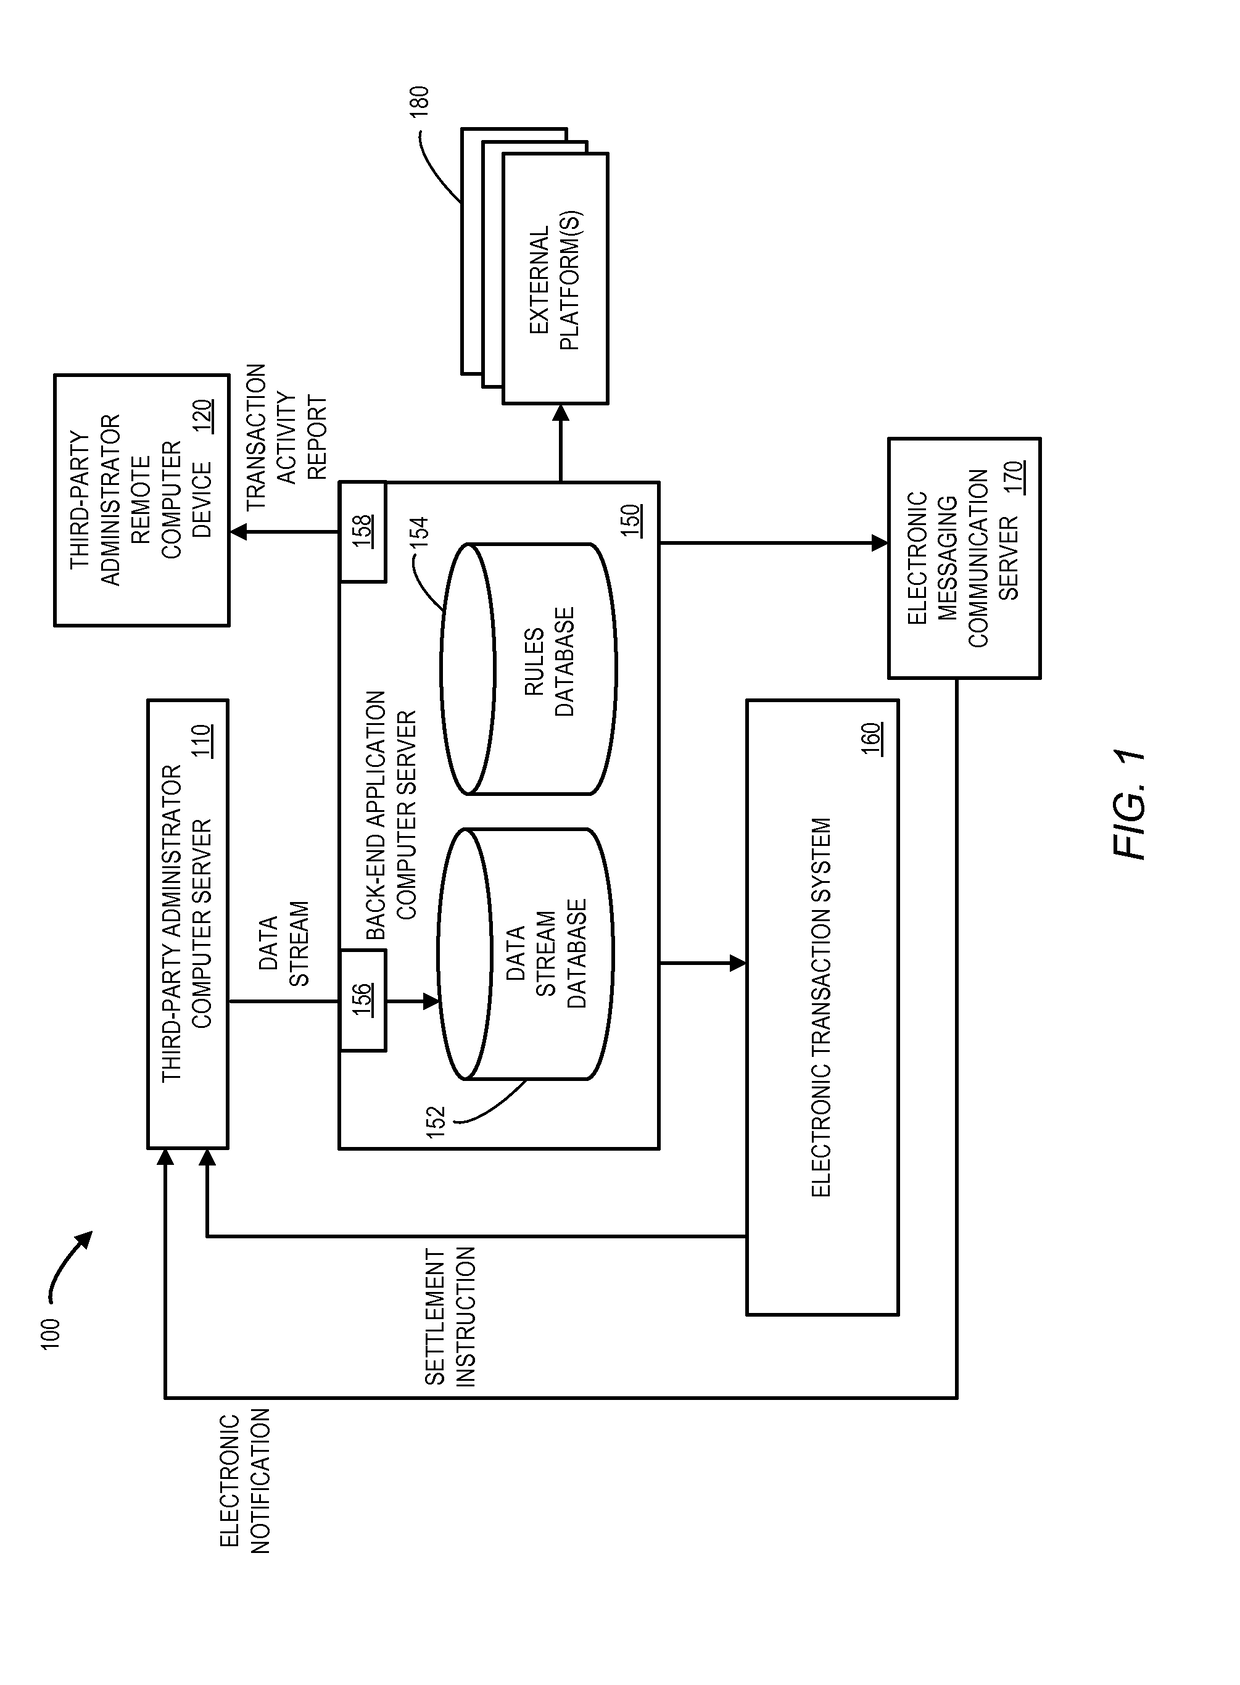 System to dynamically adjust request values at a back-end application server